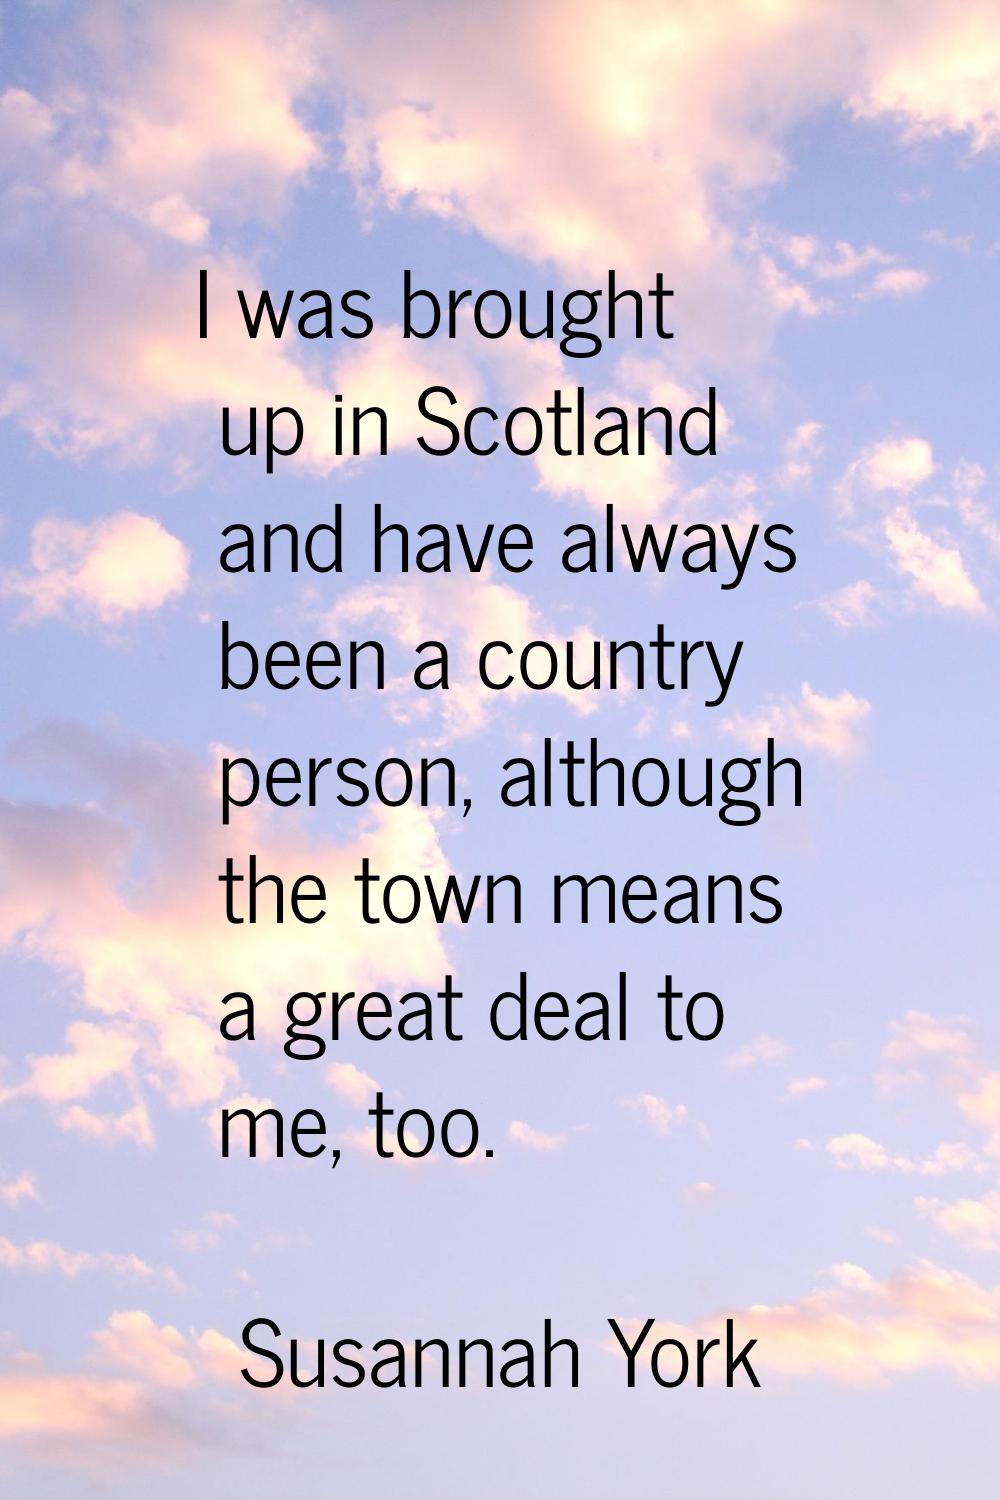 I was brought up in Scotland and have always been a country person, although the town means a great